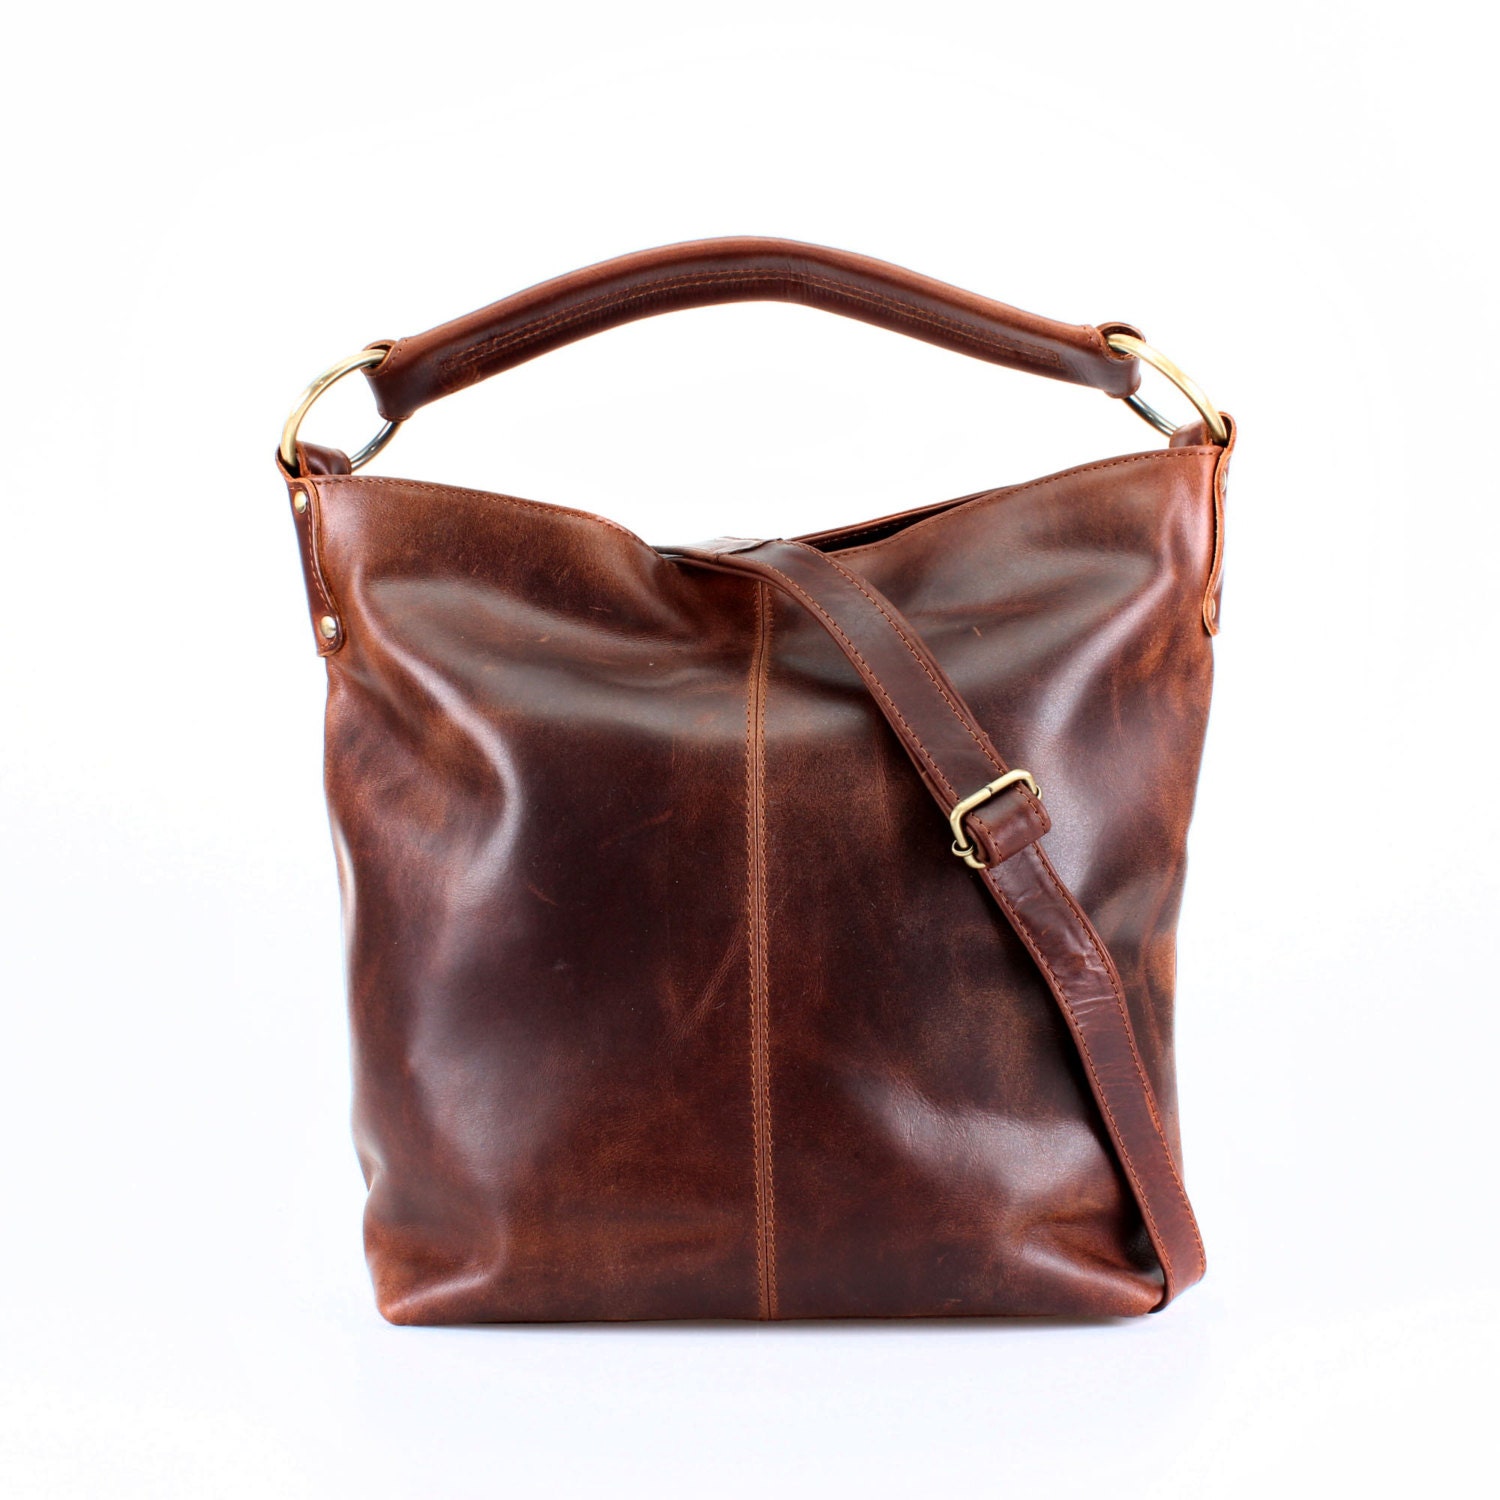 Distressed Brown Leather Handbag Hobo Tote by TheLeatherStore